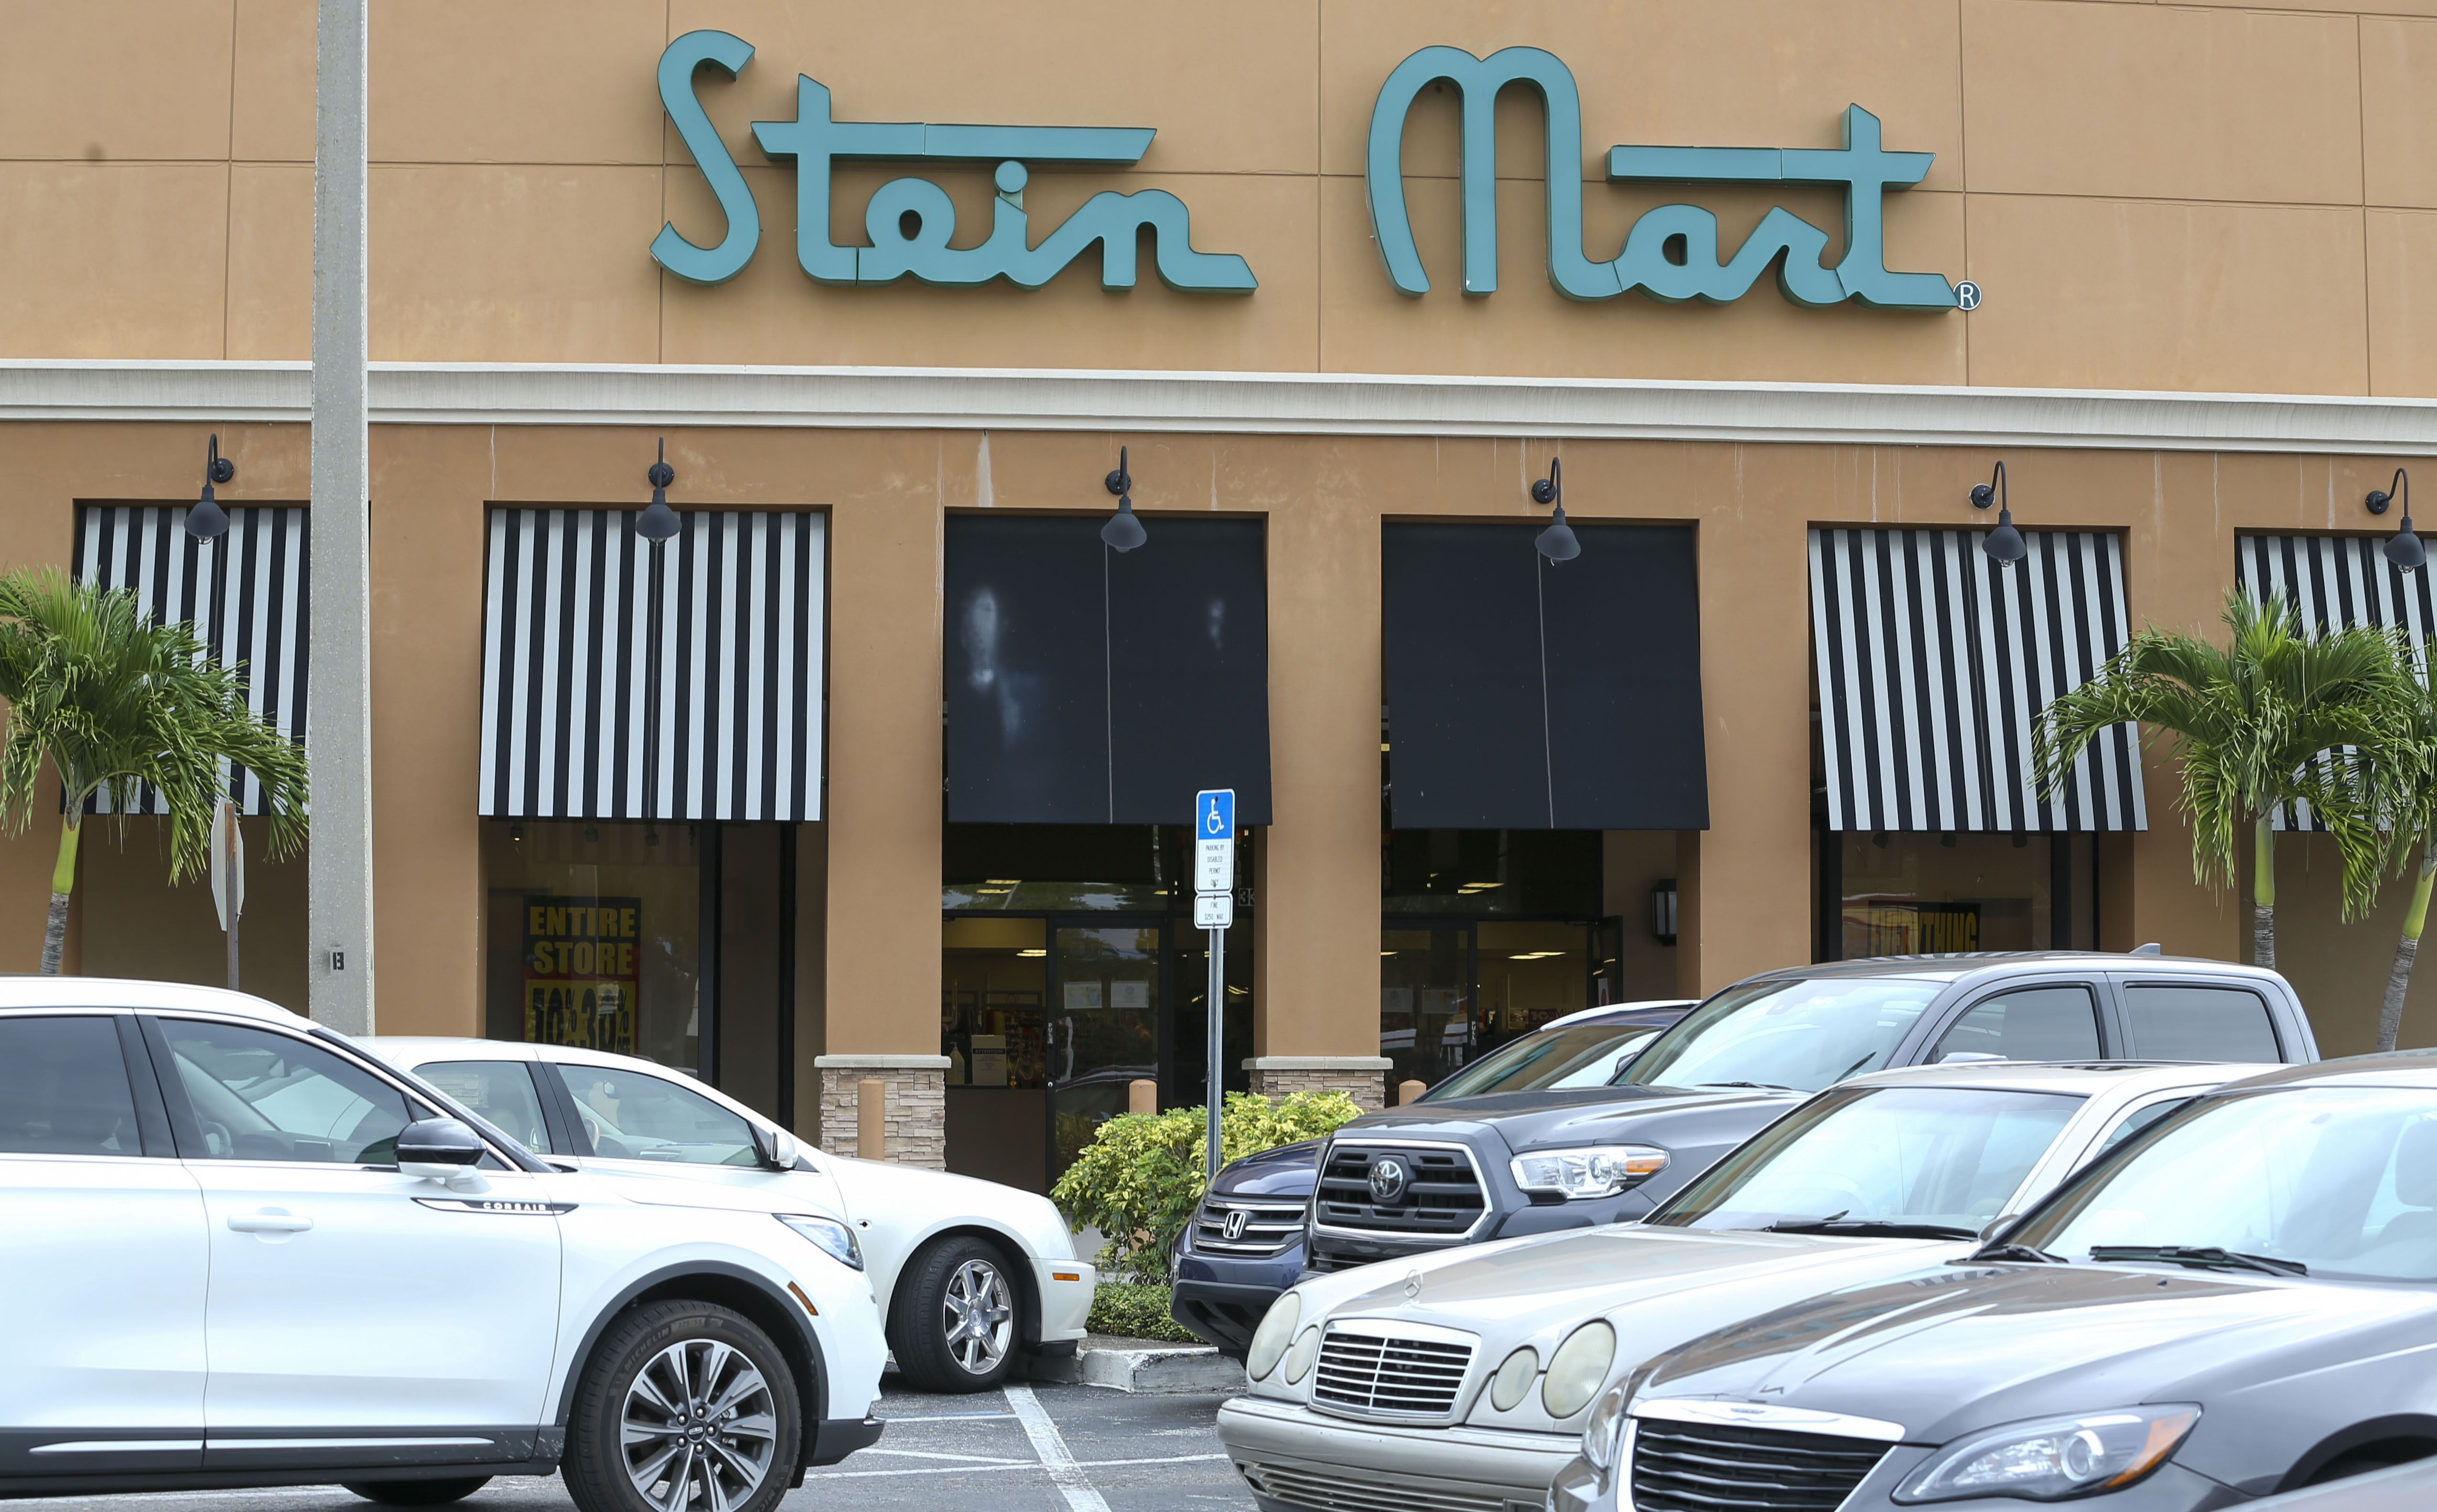 It's goodbye for Stein Mart, the 